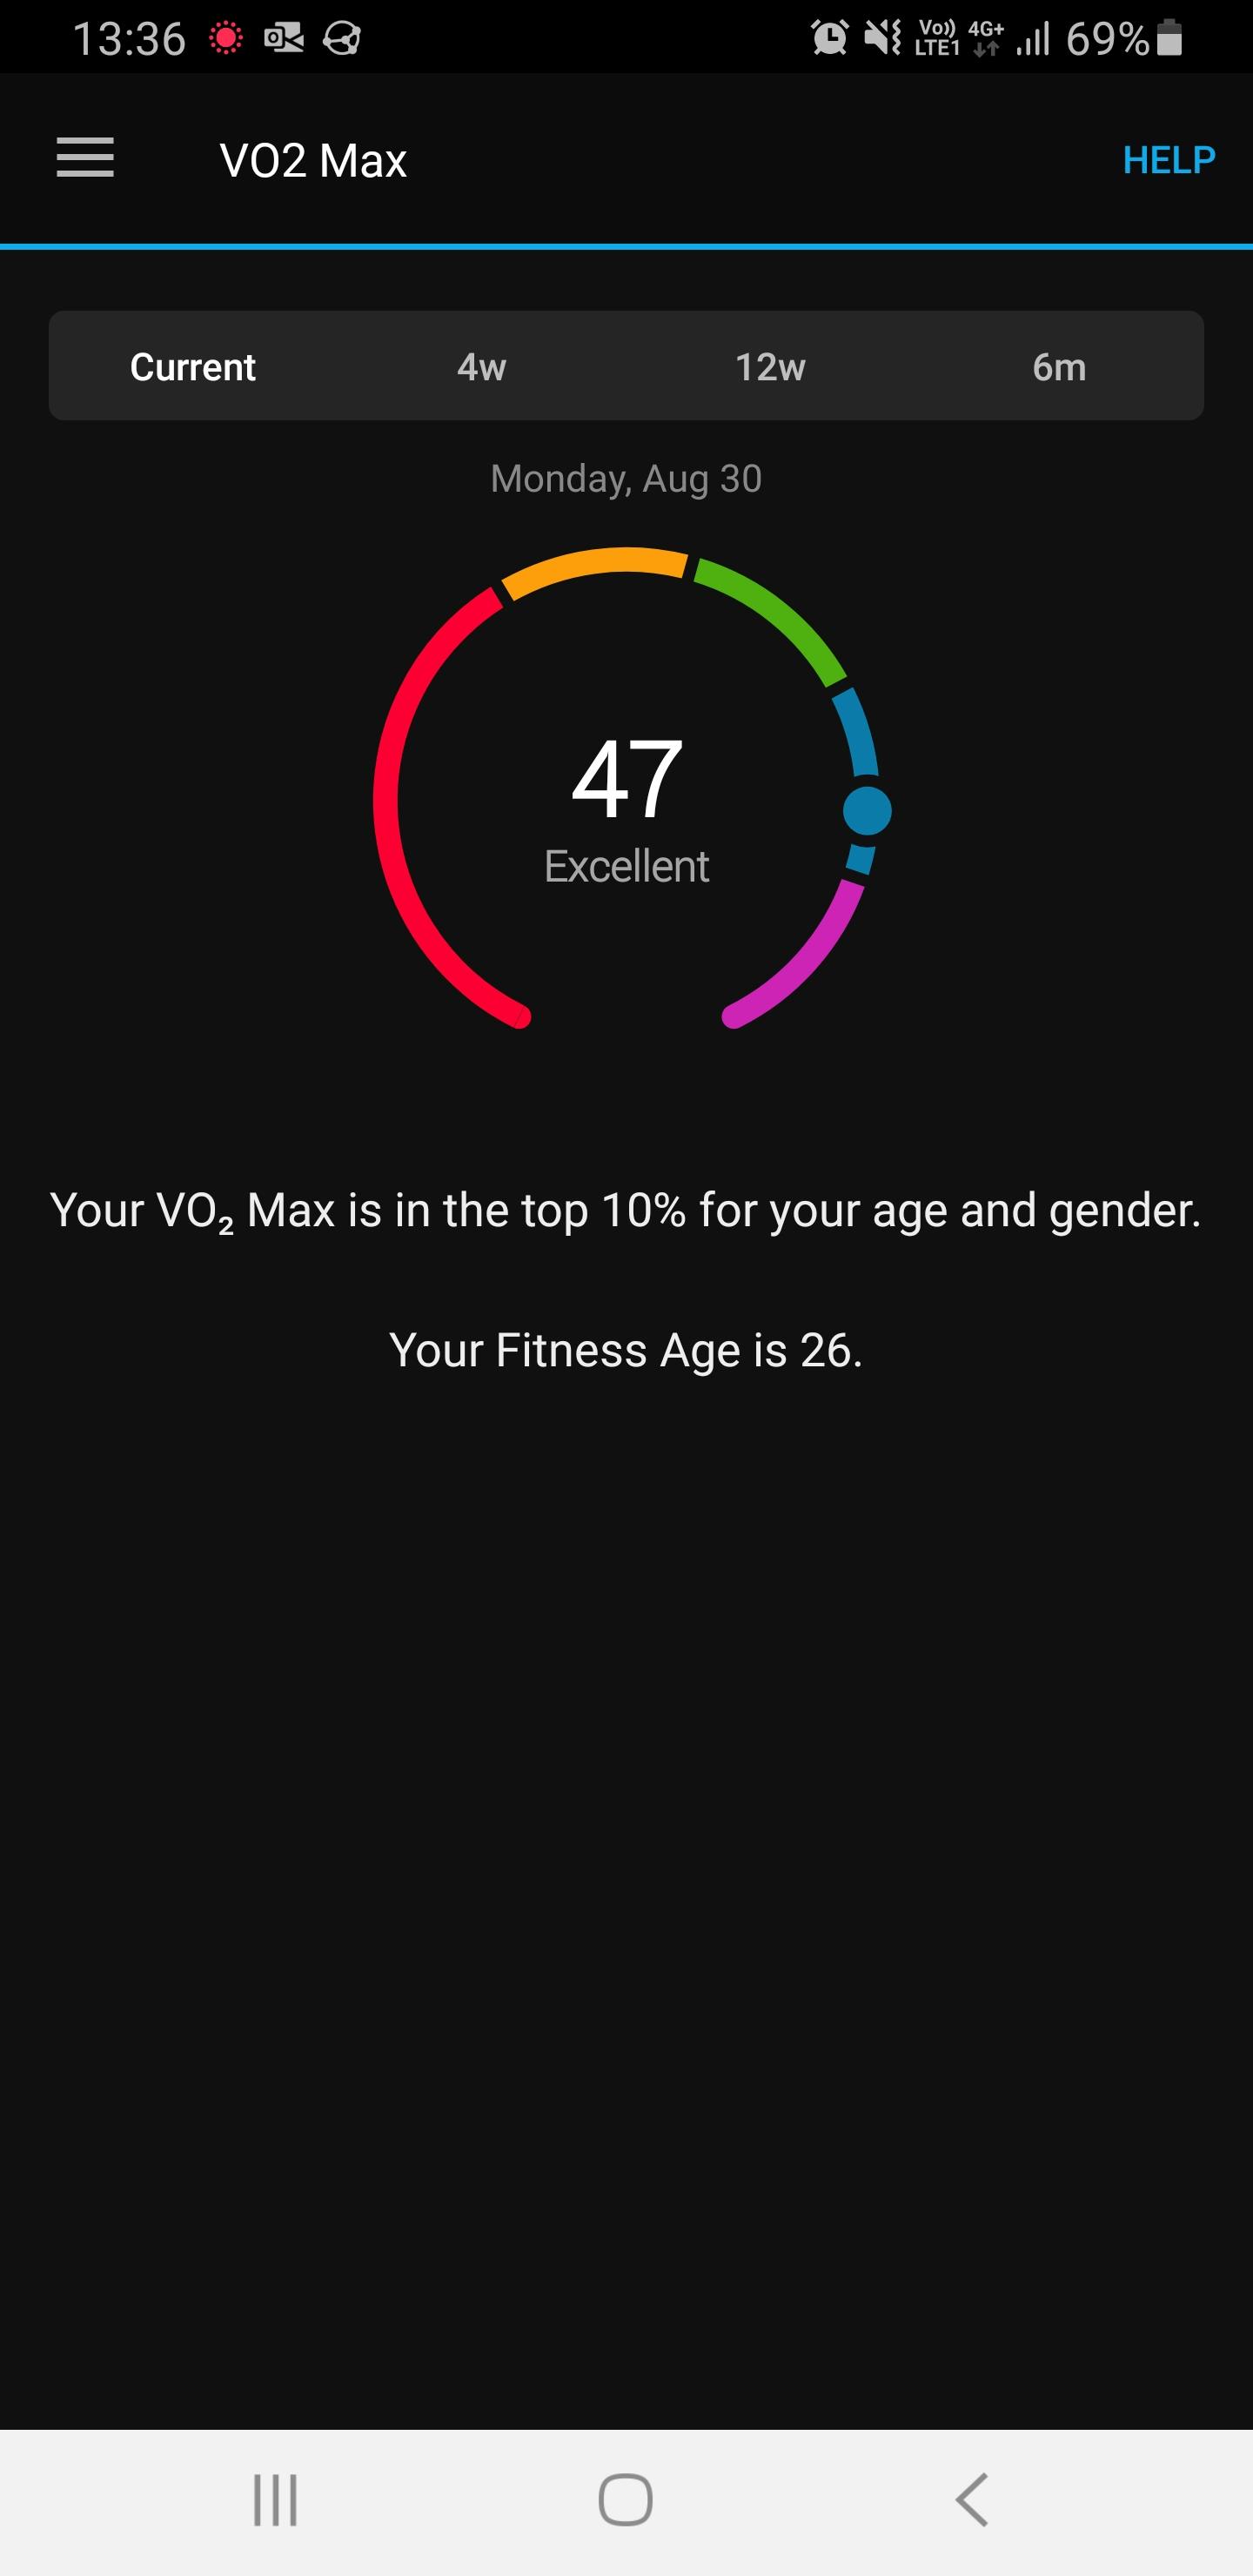 My fitness age as reported by Garmin